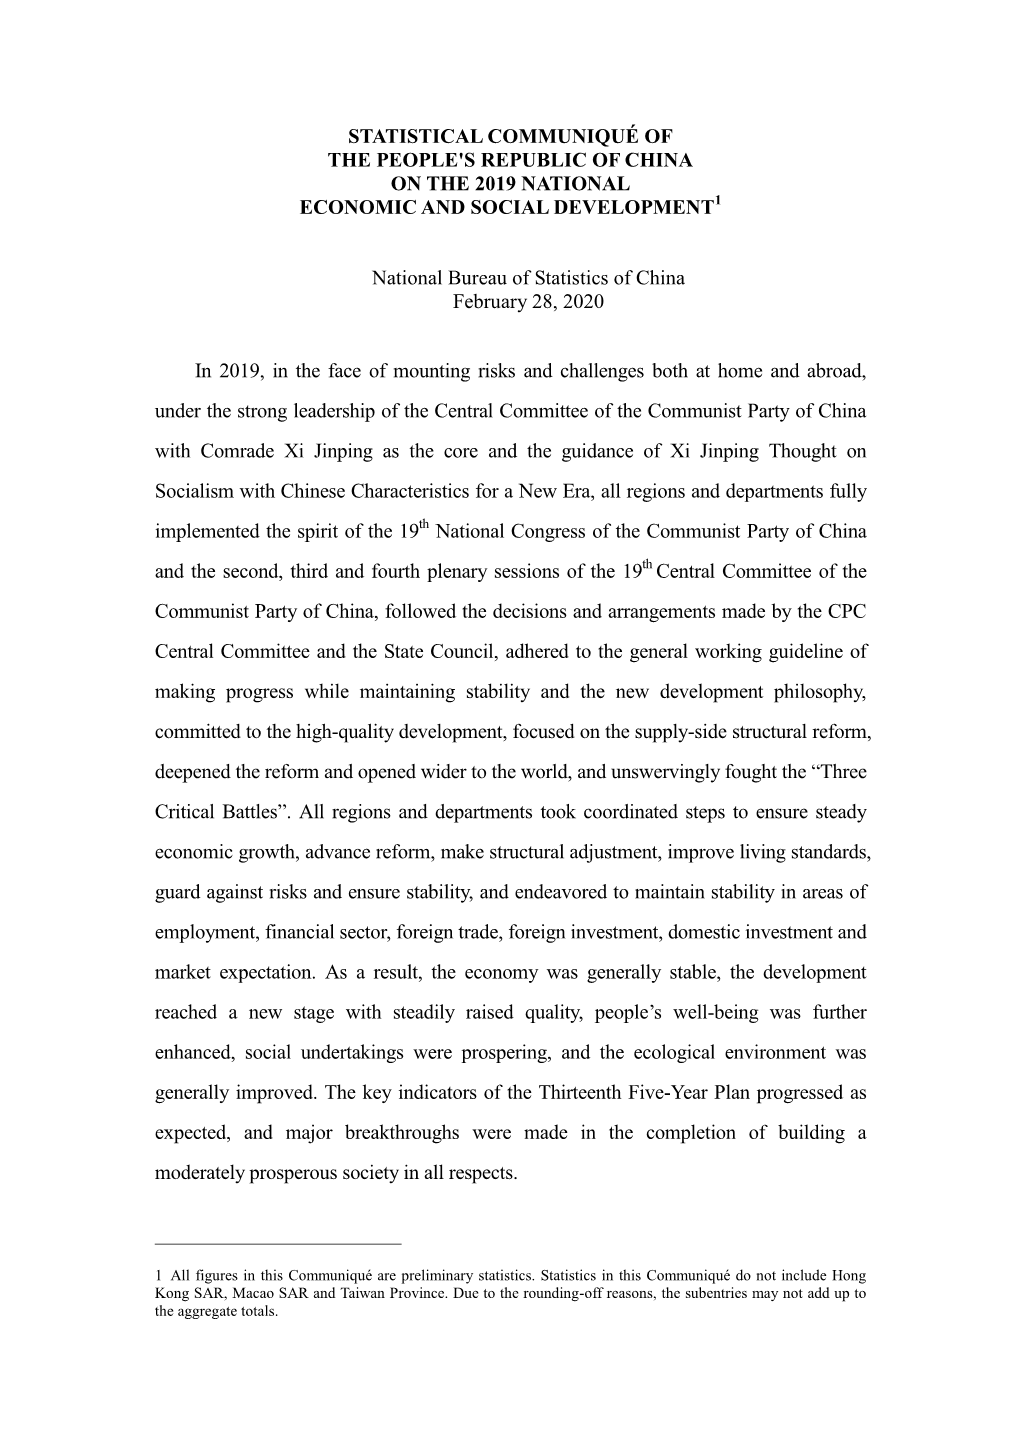 Statistical Communiqué of the People's Republic of China on the 2019 National Economic and Social Development1